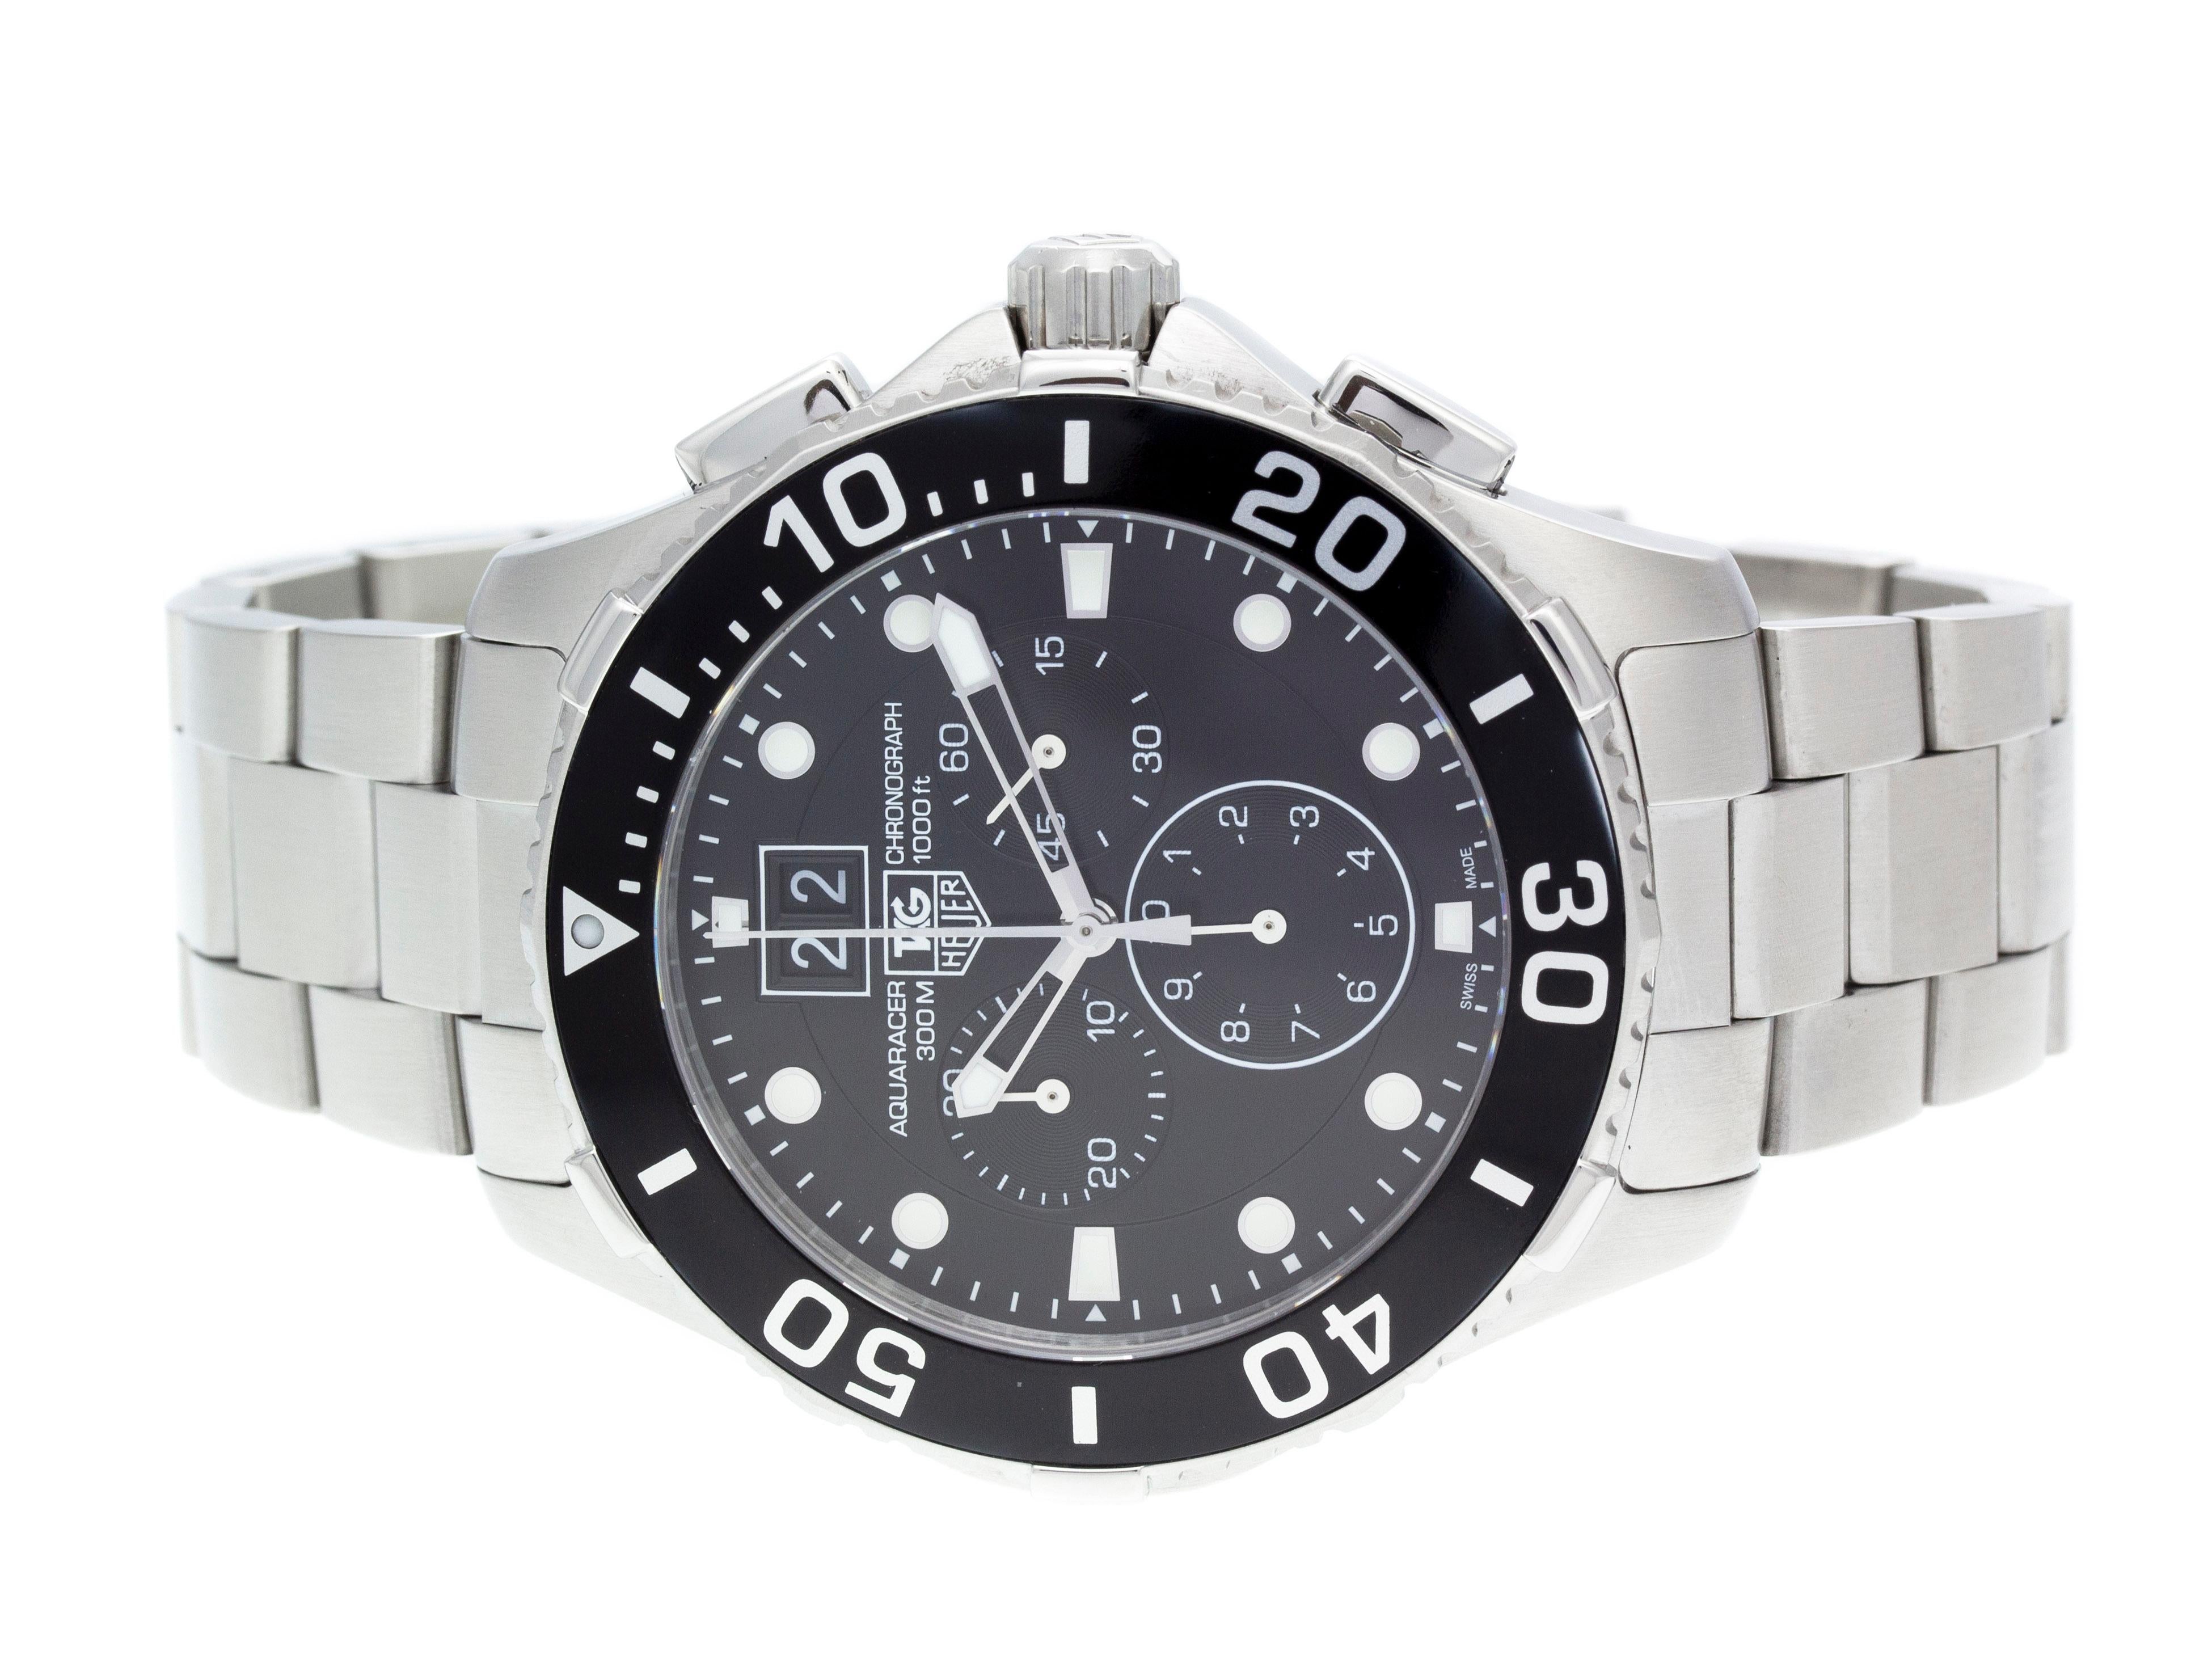 Stainless steel Tag Heuer Aquaracer Grande quartz watch with a 43mm case, black dial, and steel braclelet with folding clasp. Features include hours, minutes, seconds, grand date, and chronograph. Comes with a Deluxe Gift Box and 2 Year Store